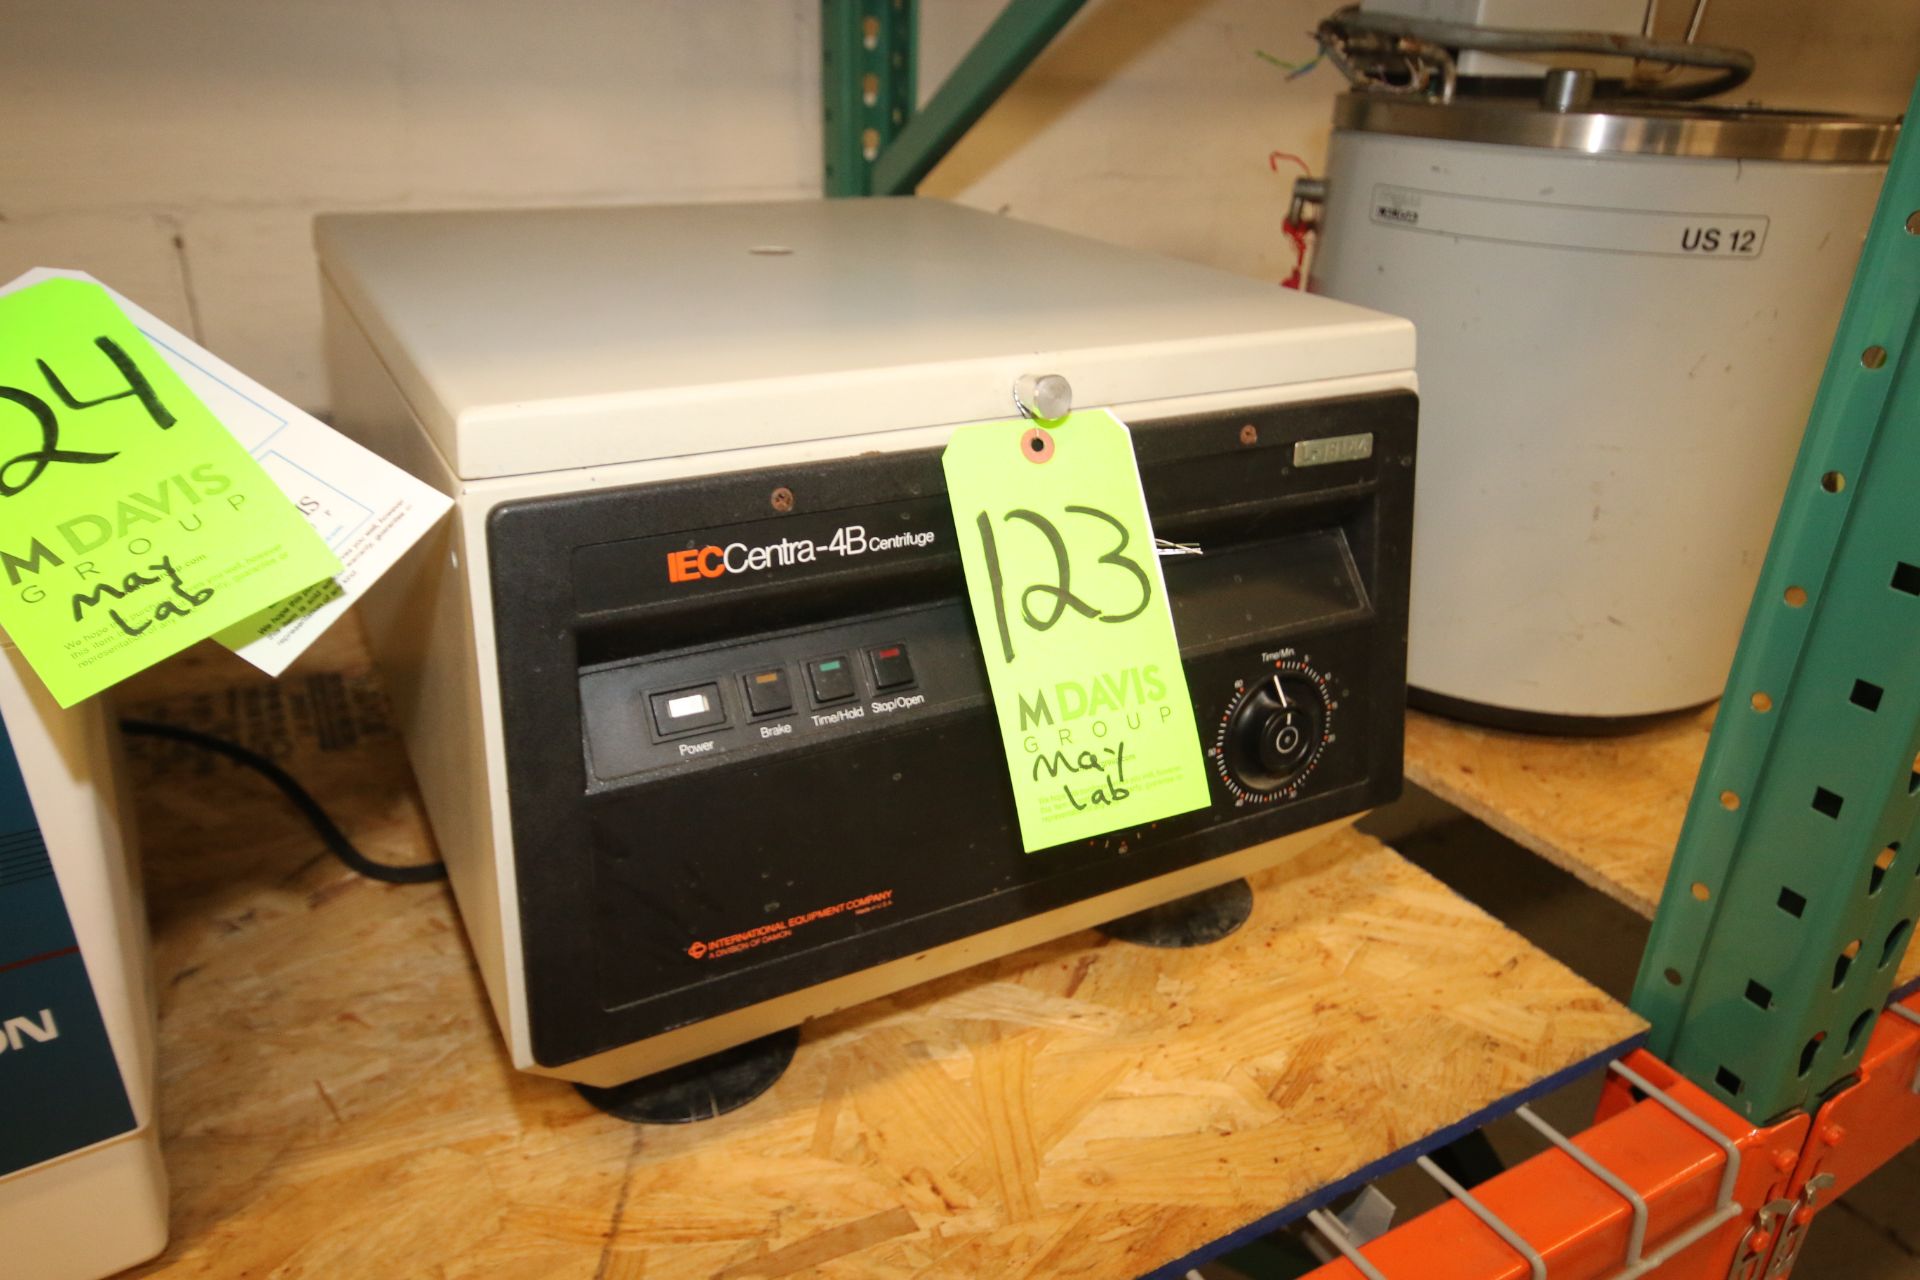 IECCentra-4B Centrifuge, S/N 23730449, 120 Volts ***Located in MDG Auction Showroom--Pittsburgh,